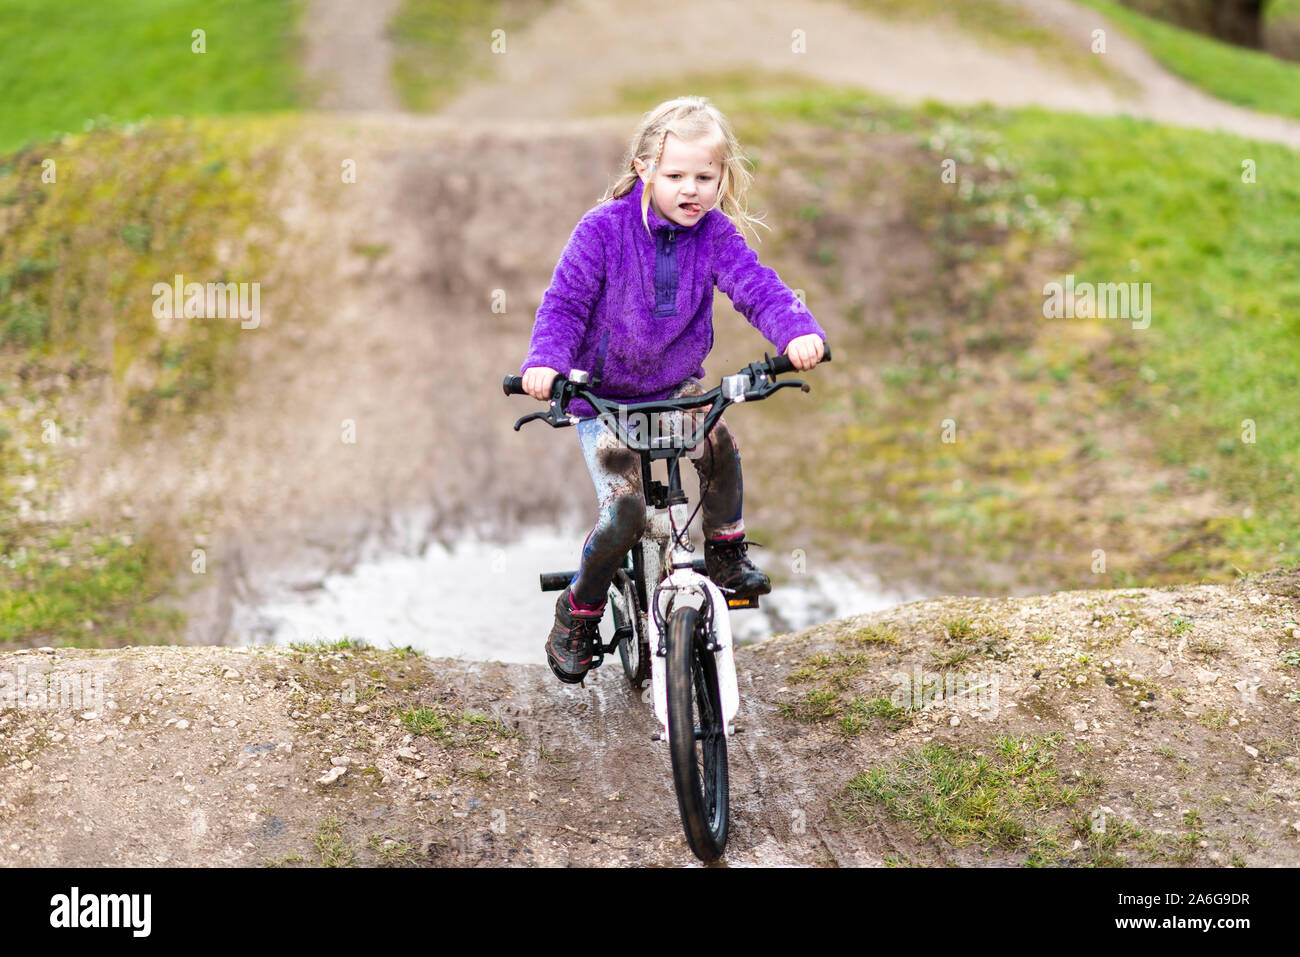 A pretty little girl with blonde hair and a purple jumper enjoys a day at a BMX track, riding and practicing tricks, child in the countryside UK Stock Photo